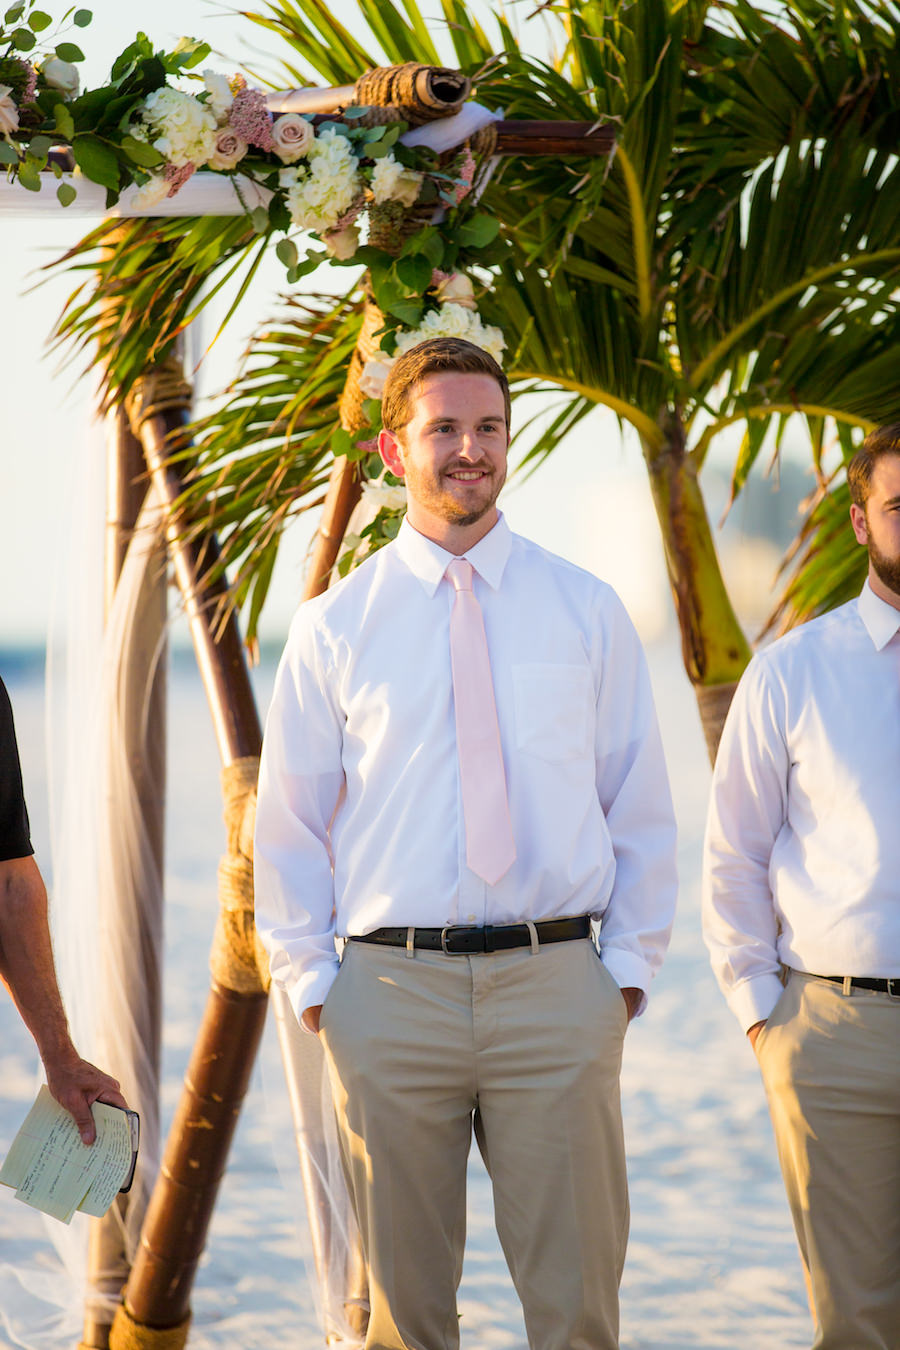 Florida Beach Wedding Groom Wedding Portrait in Khaki Pants and White Button Down Shirt with Pink Tie | Tampa Wedding Photographer Kera Photography